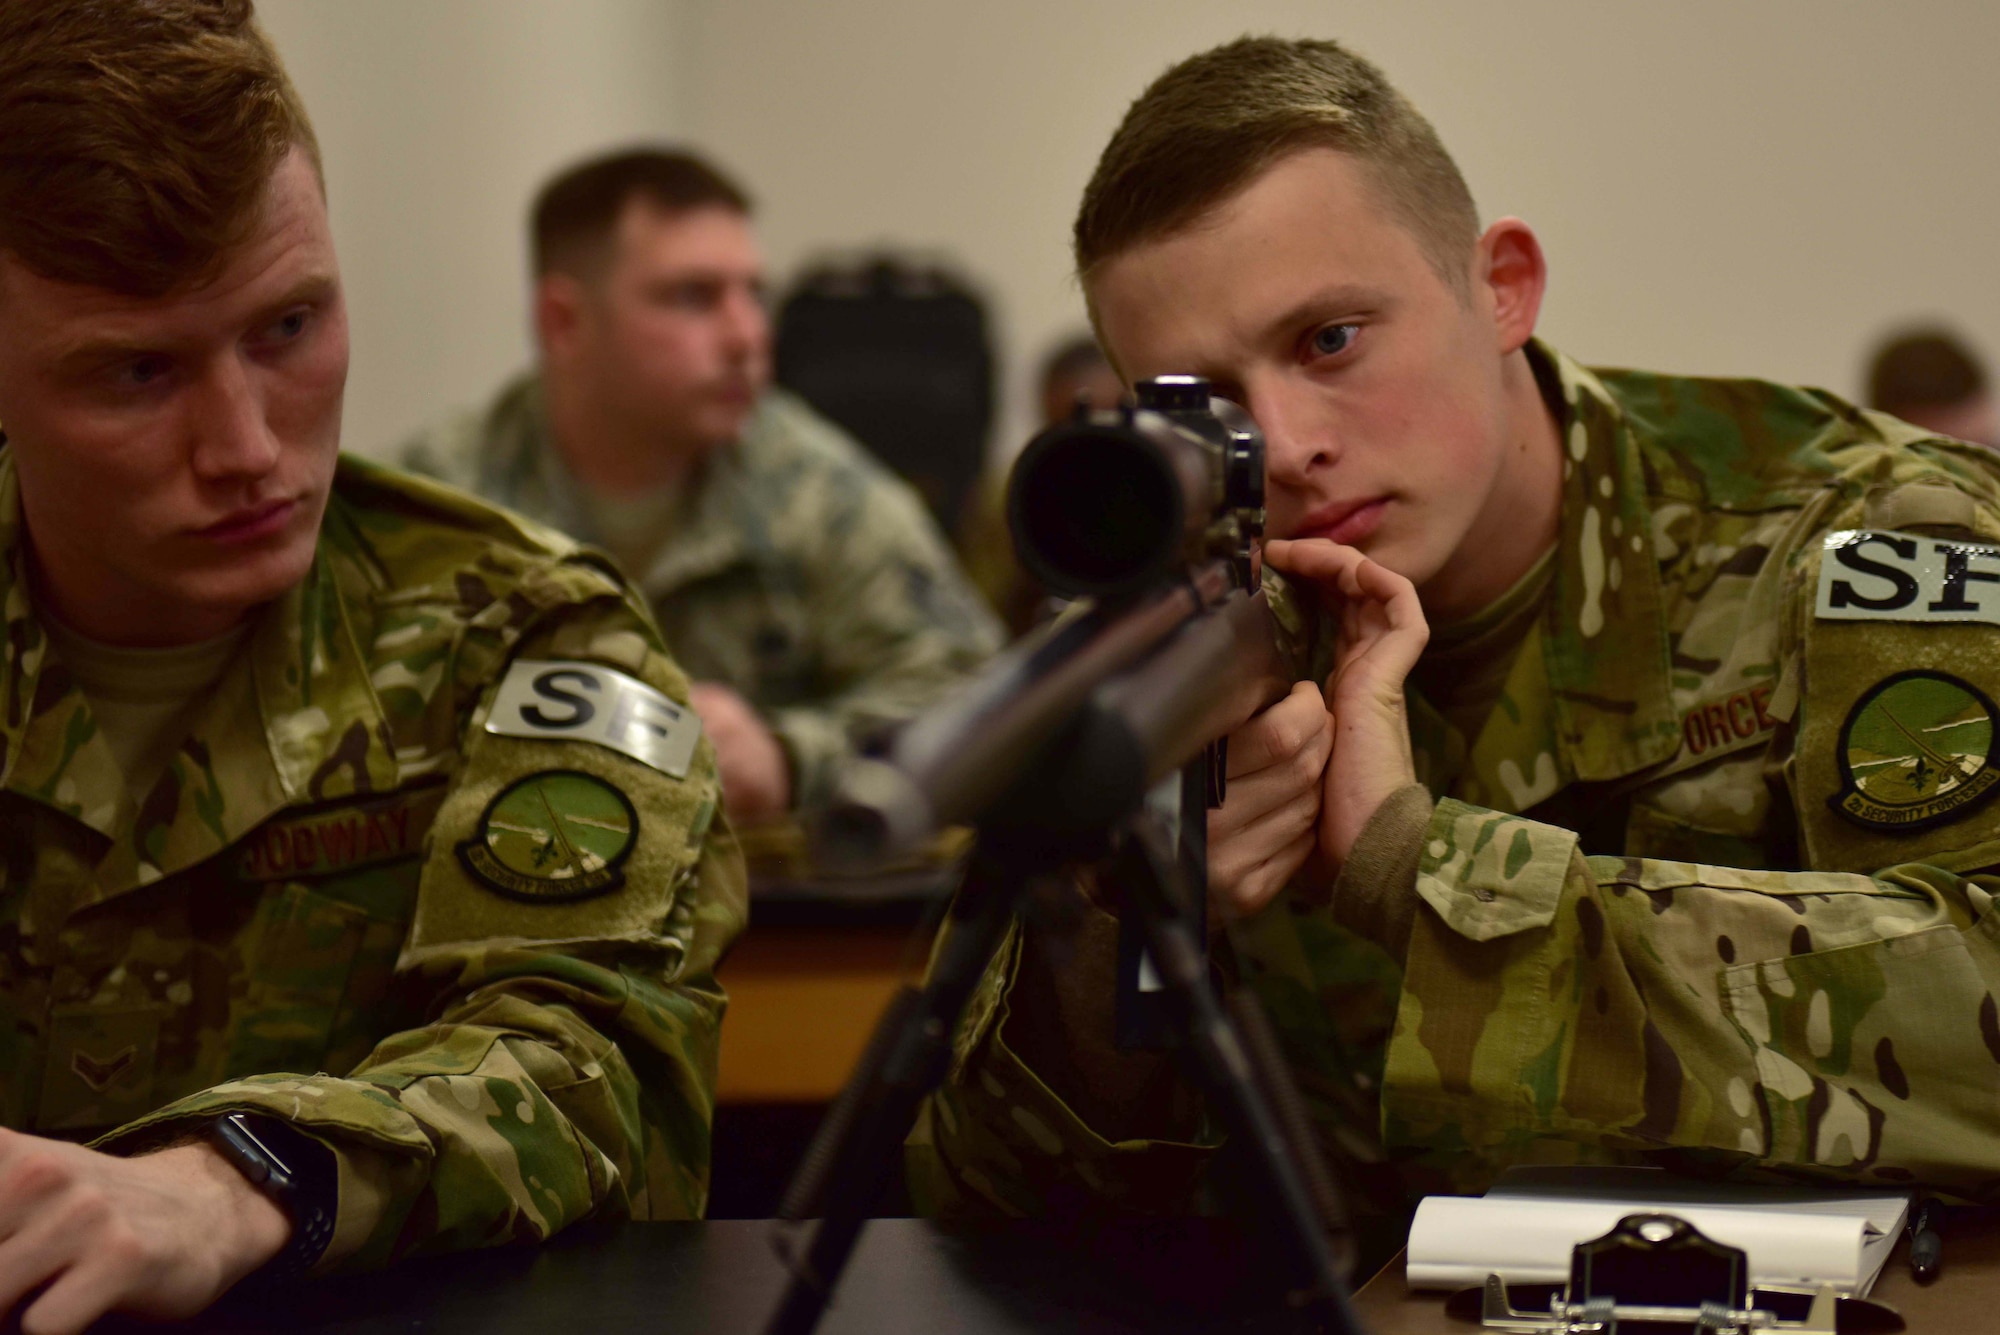 A man wearing the operational camouflage pattern uniform looks down the scope of a M24 sniper weapon system as a man wearing the OCP uniform watches him.